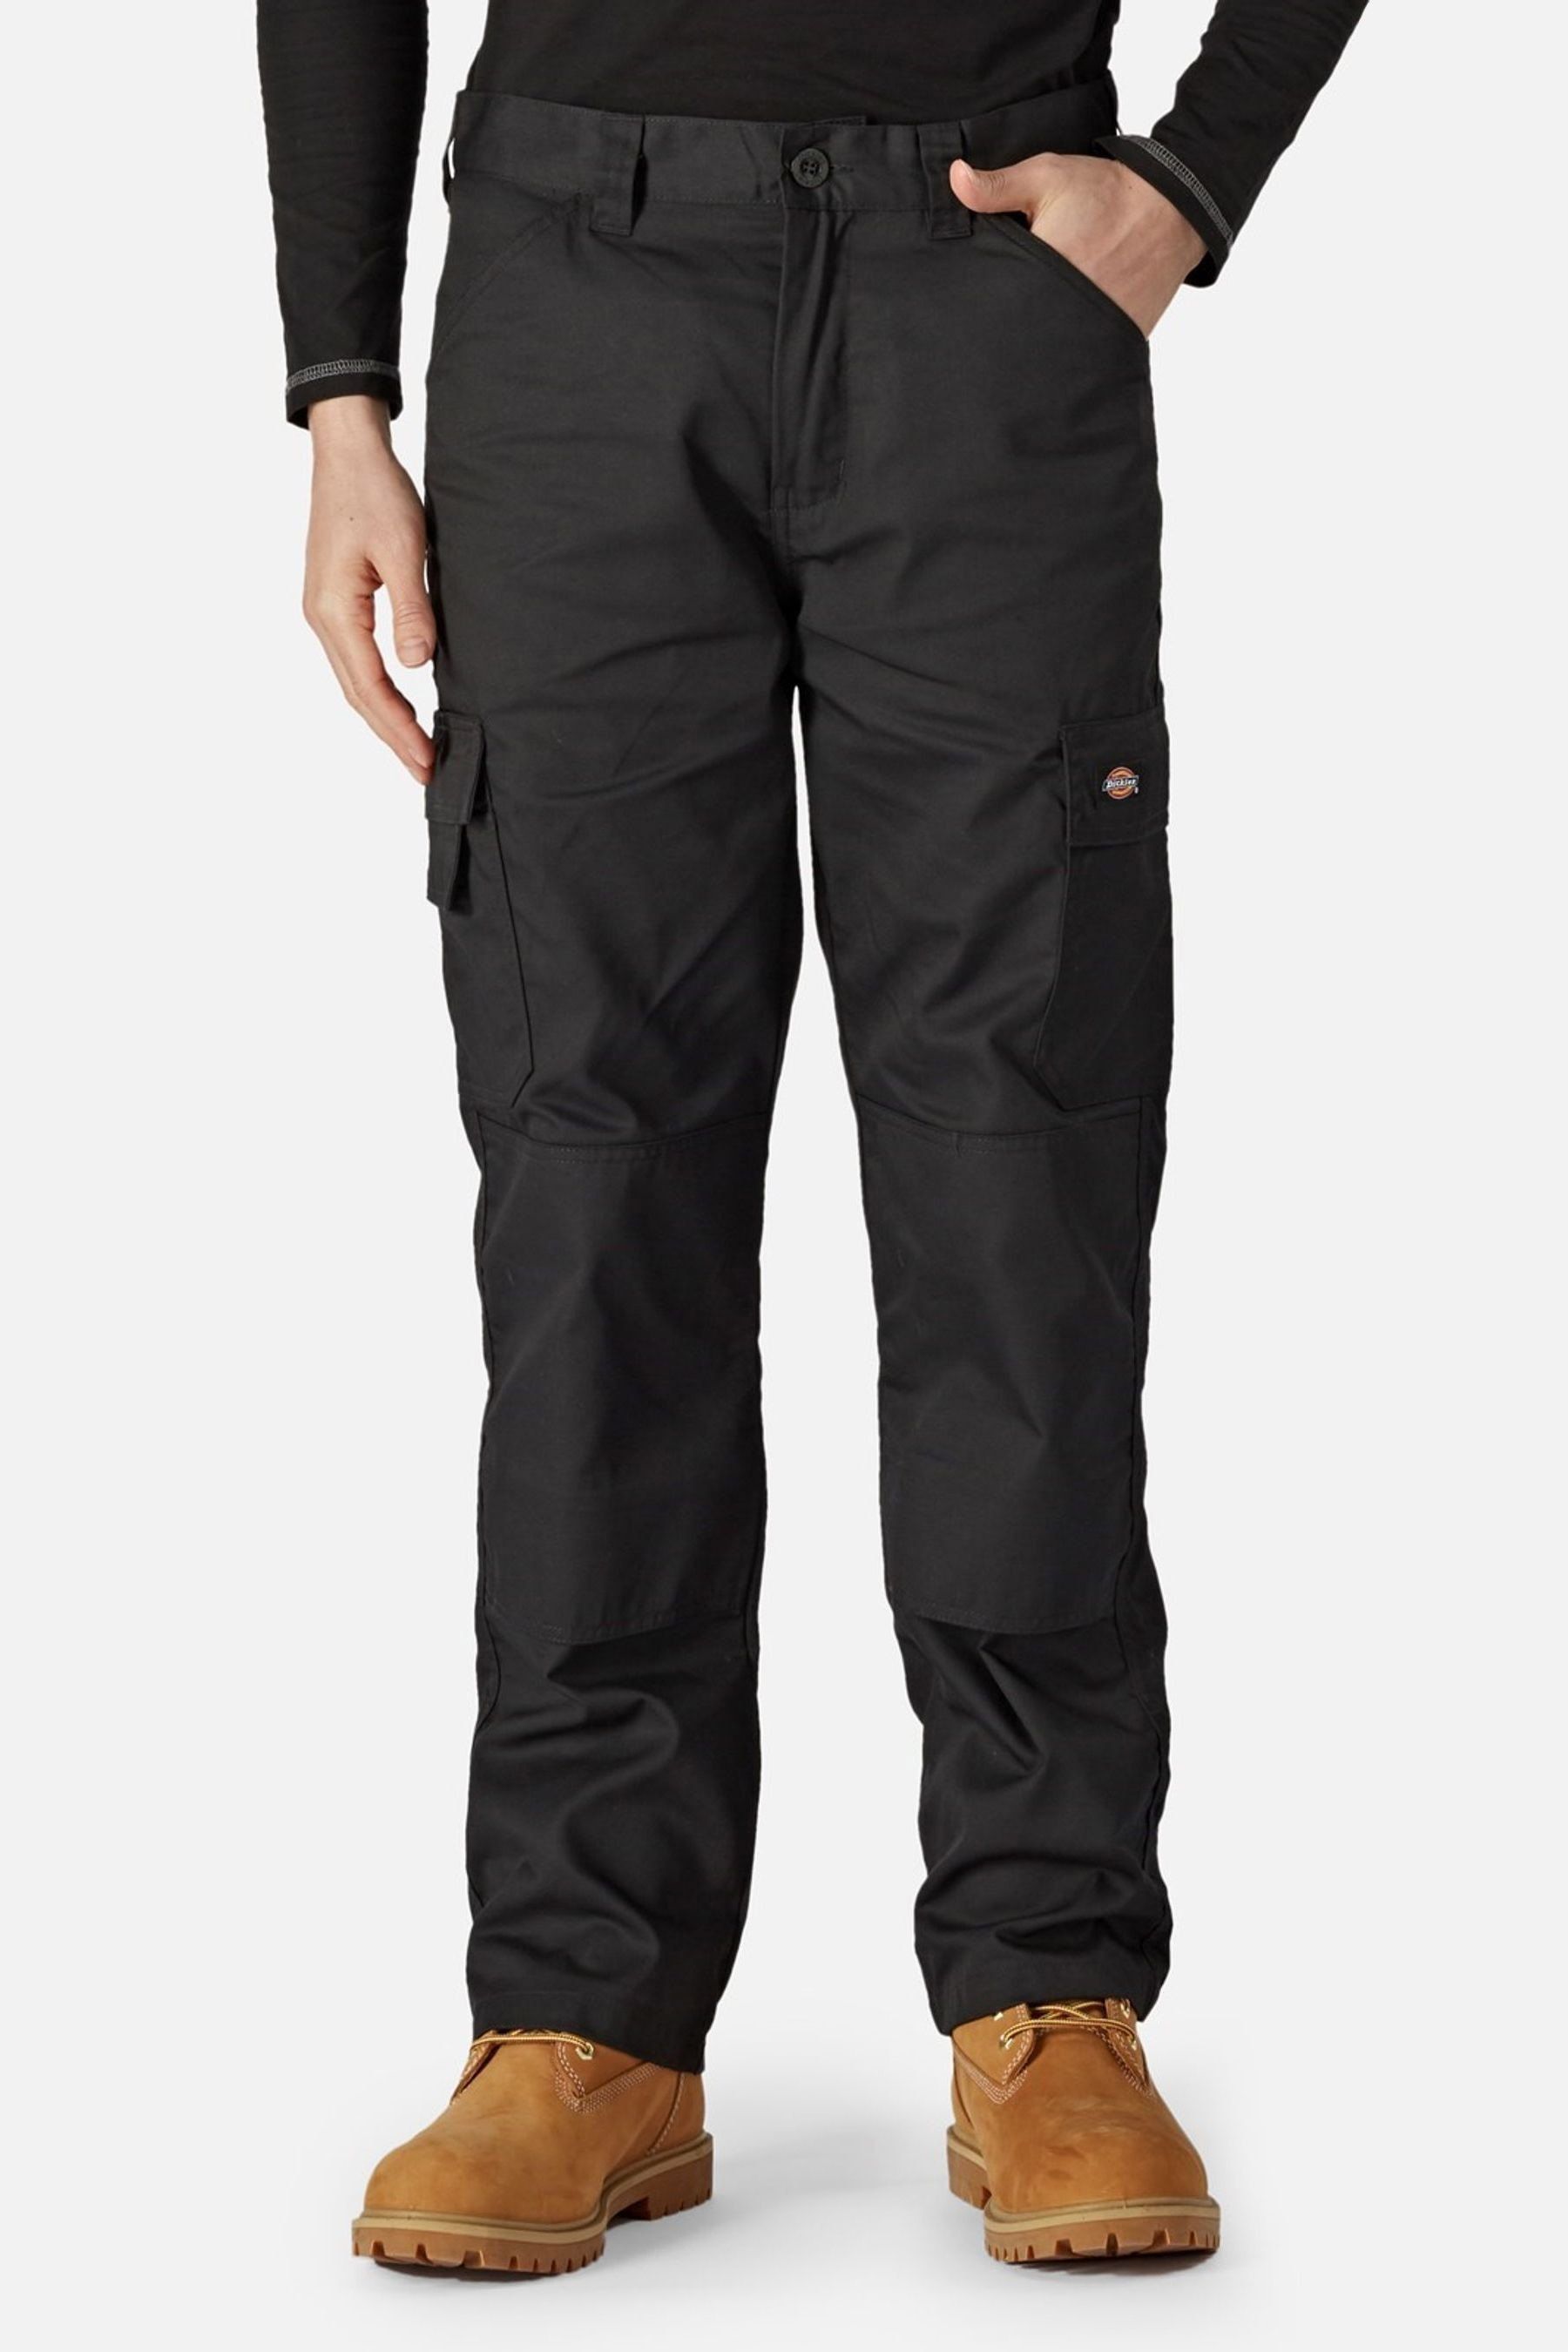 Dickies Work Pants Fit Guide 2023  How to Style Them 874 873 872   Urban Industry